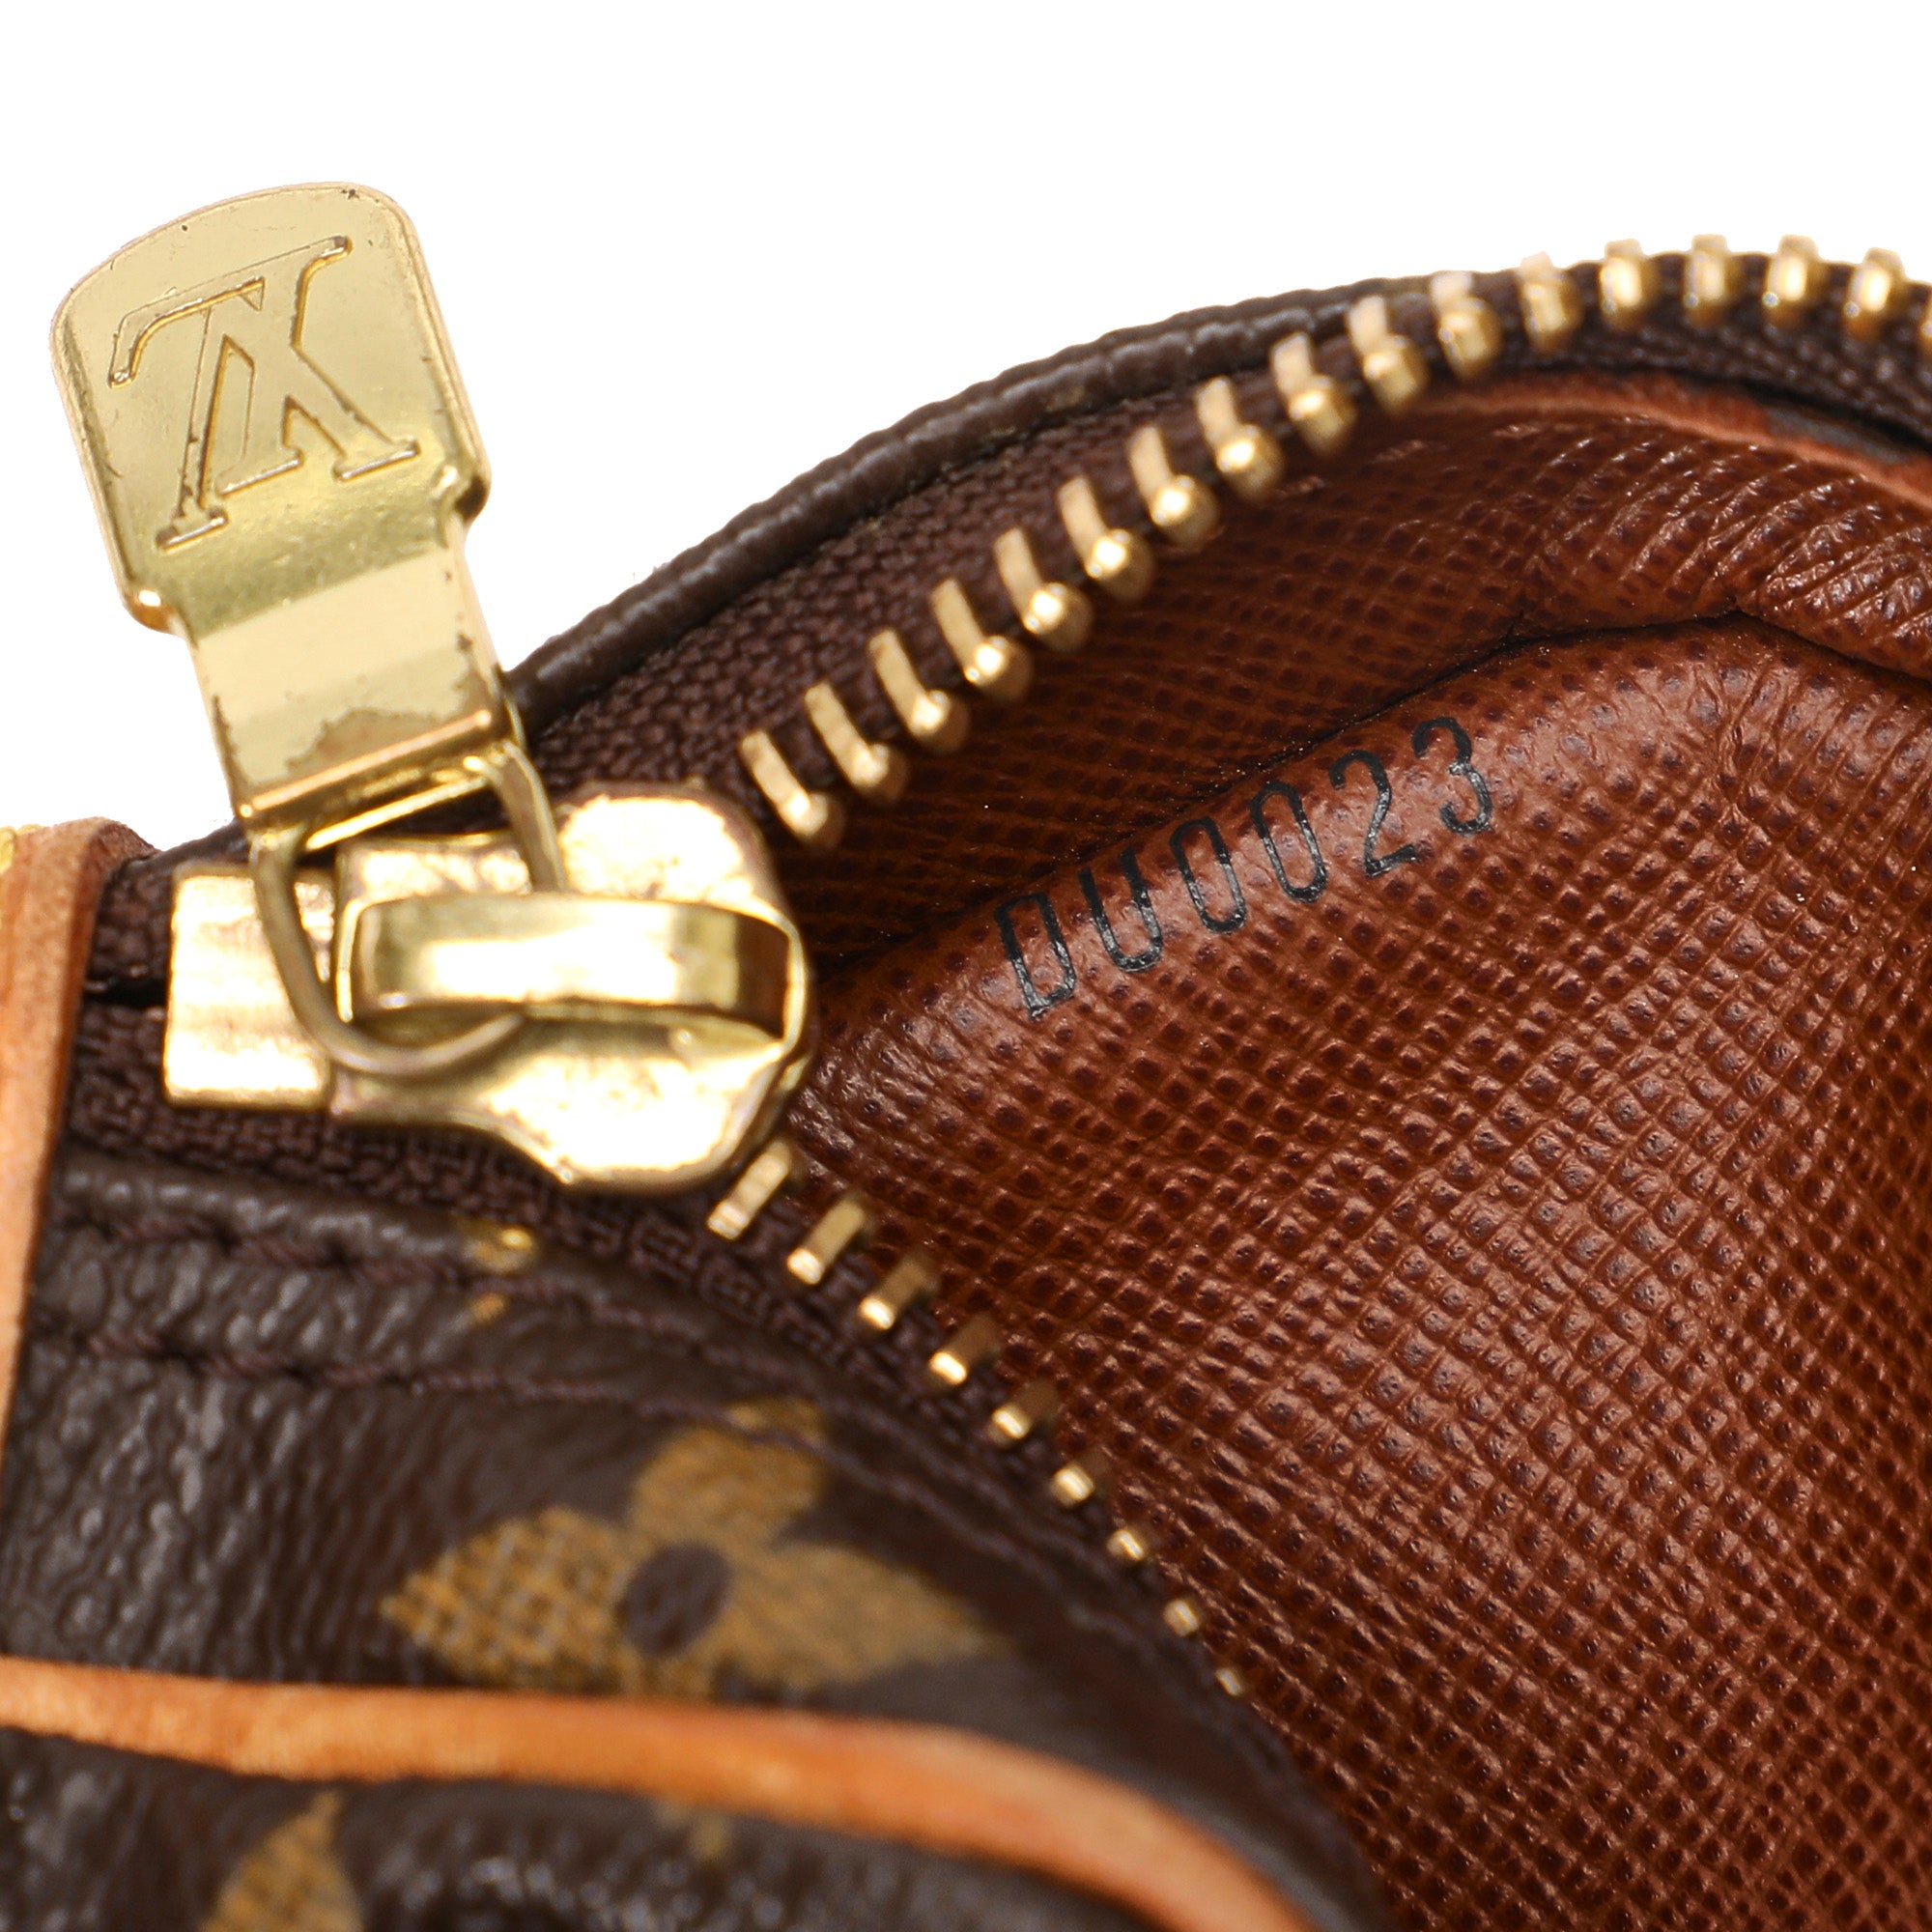 Louis Vuitton 100% Coated Canvas Brown Monogram Pochette Marly Bandouliere  One Size - 79% off